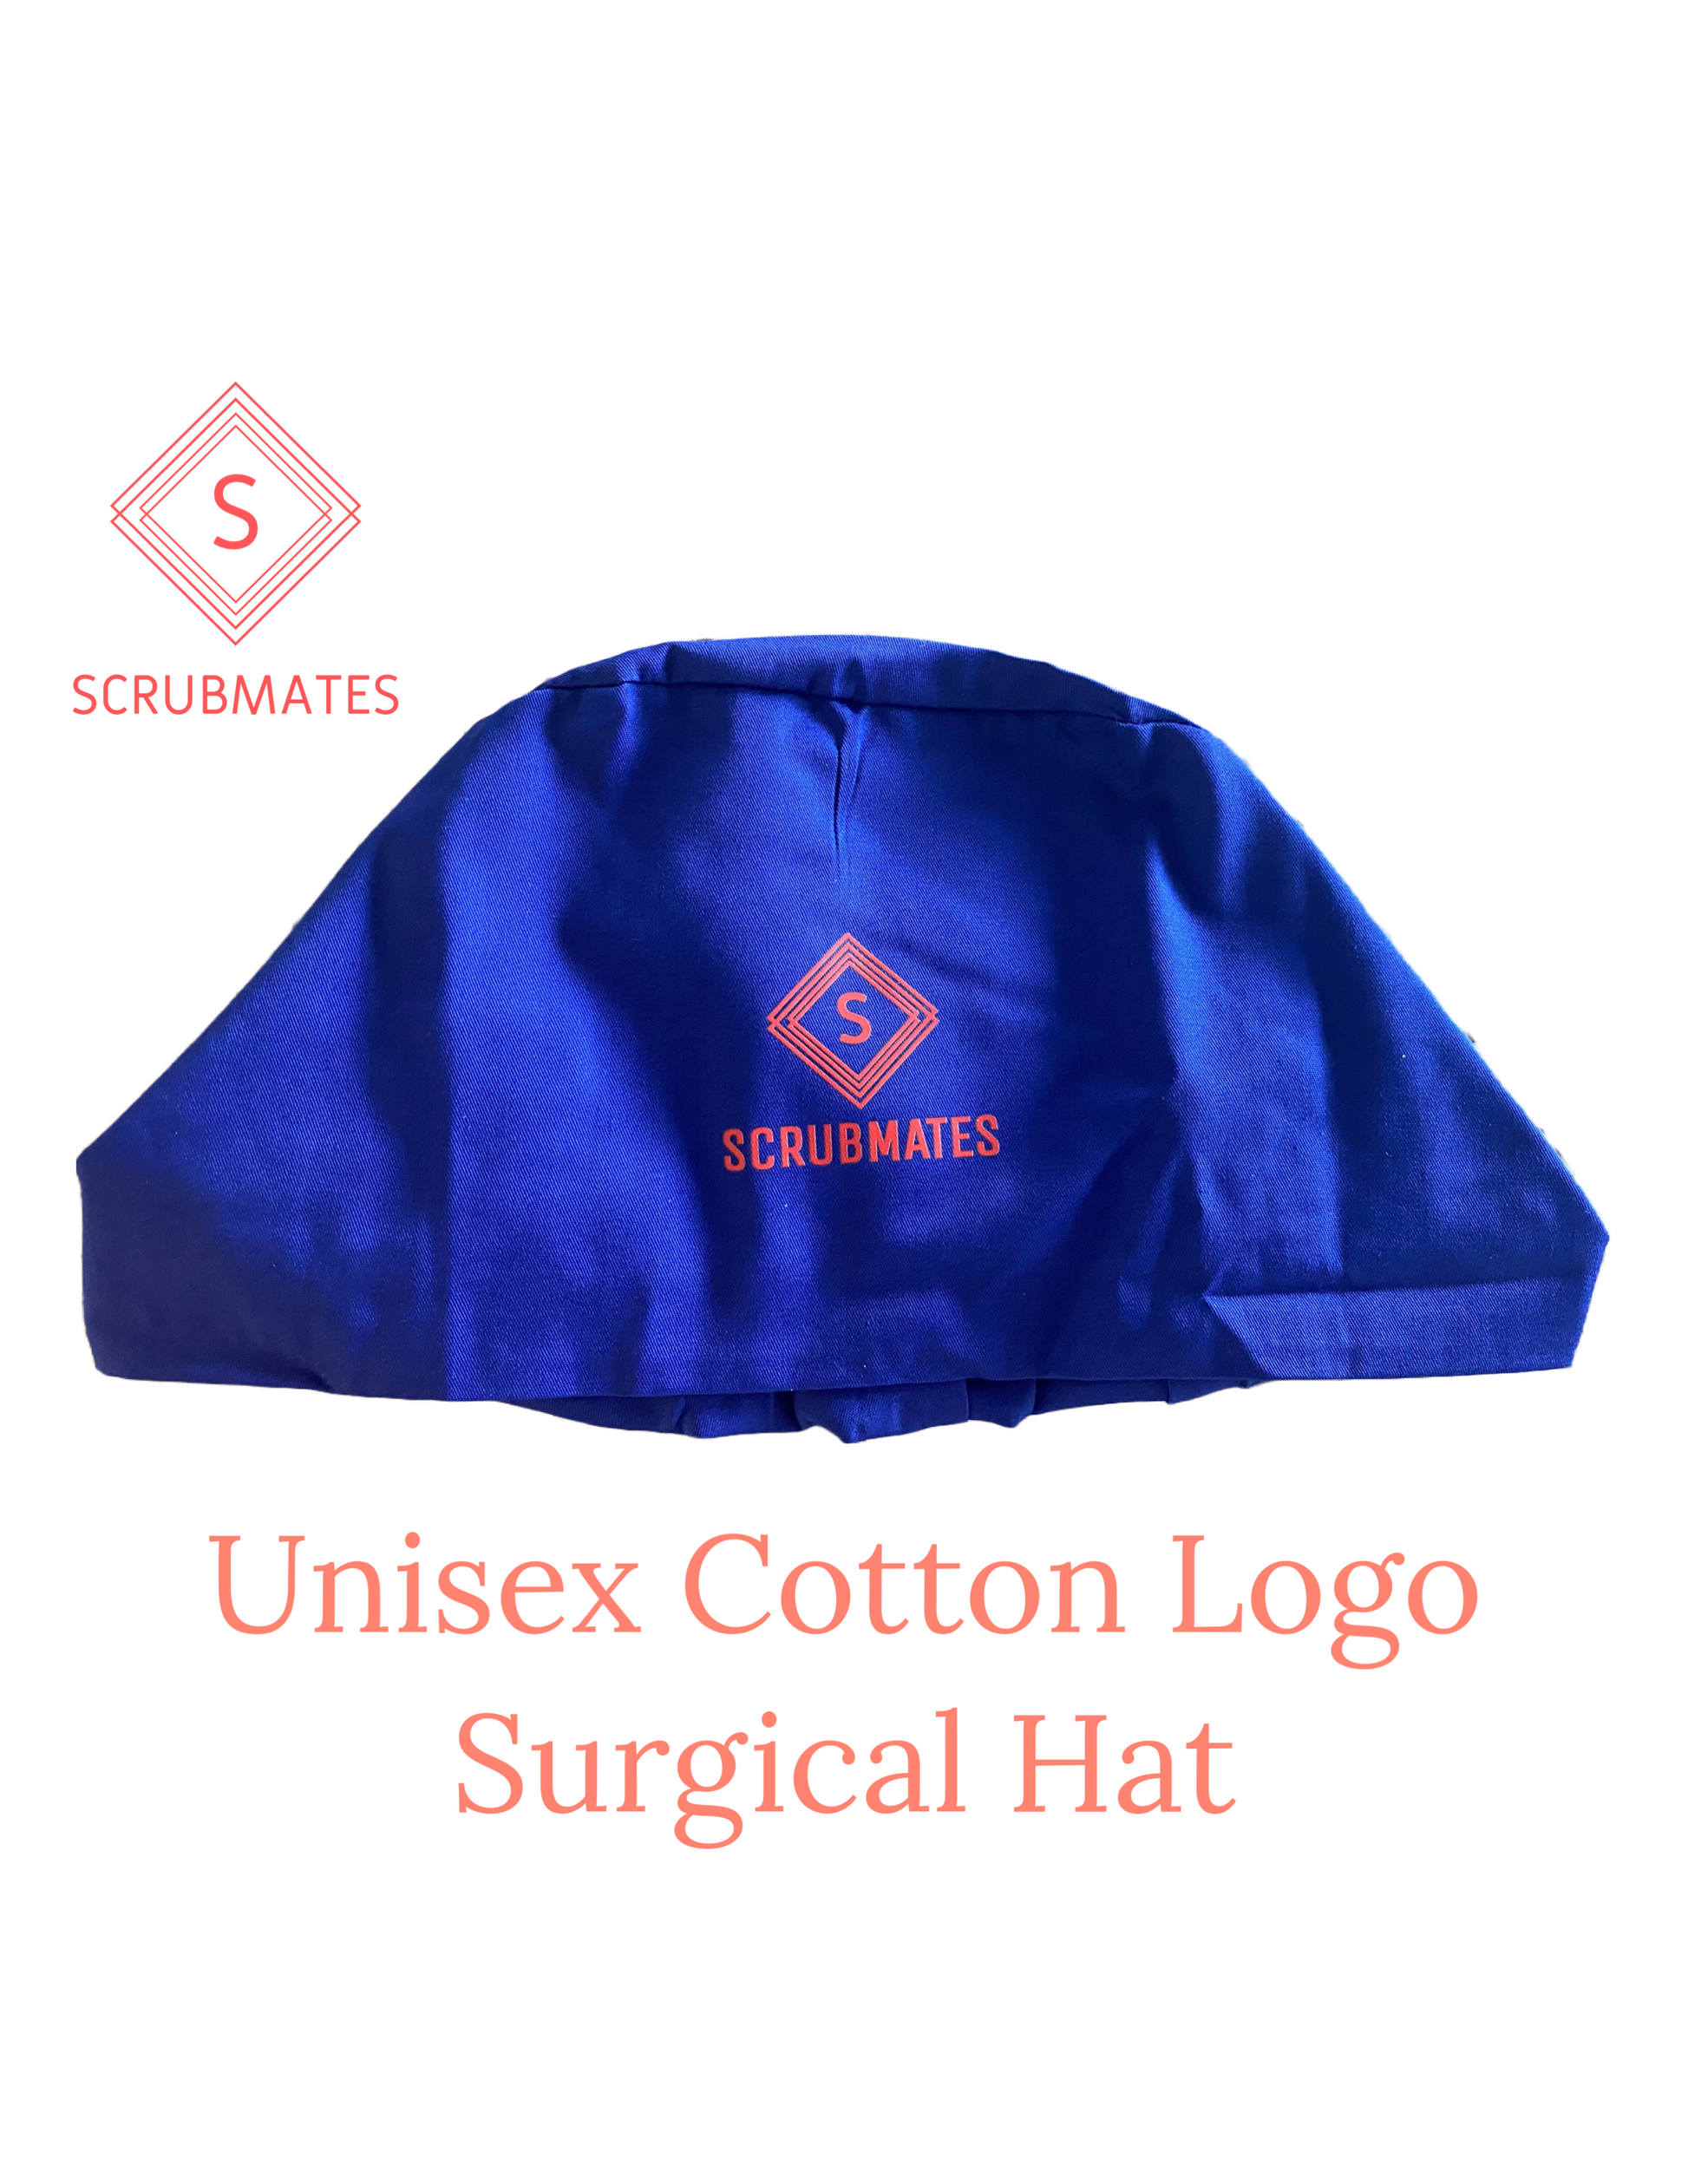 Scrubmates unisex logo scrub hat for men and women with modern, classic fit and sweat band with adjustable tieback. Made to protect your hair as well as provide all day comfort blue